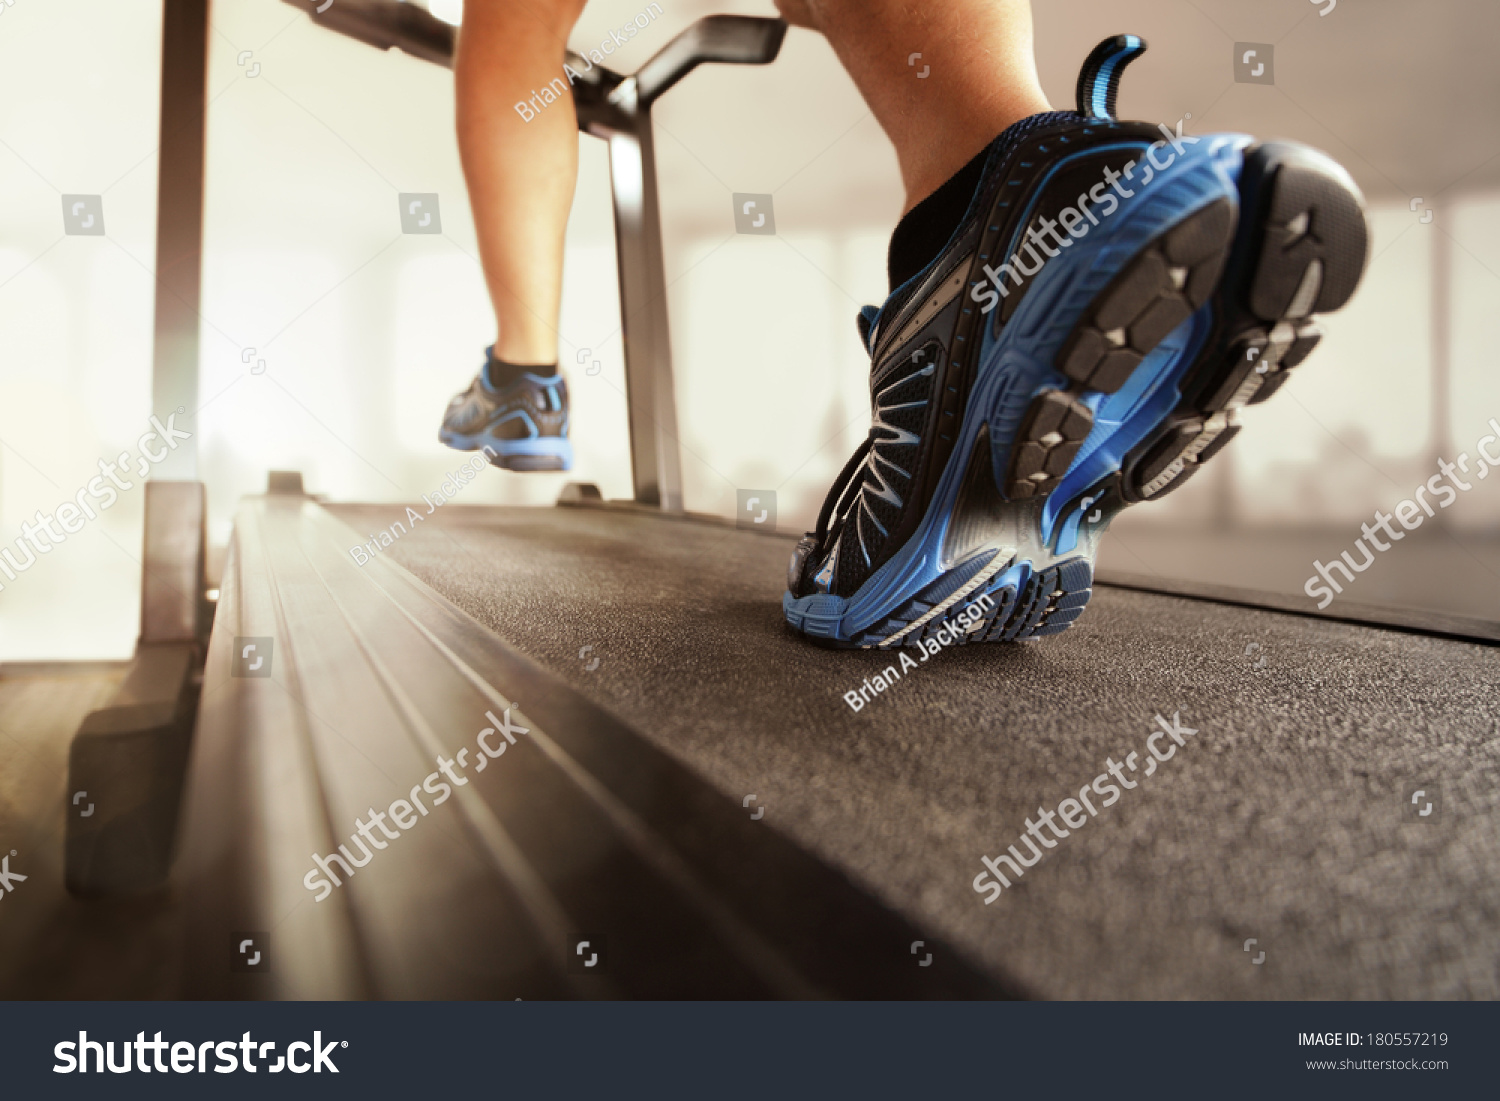 Man running in a gym on a treadmill concept for exercising, fitness and healthy lifestyle #180557219